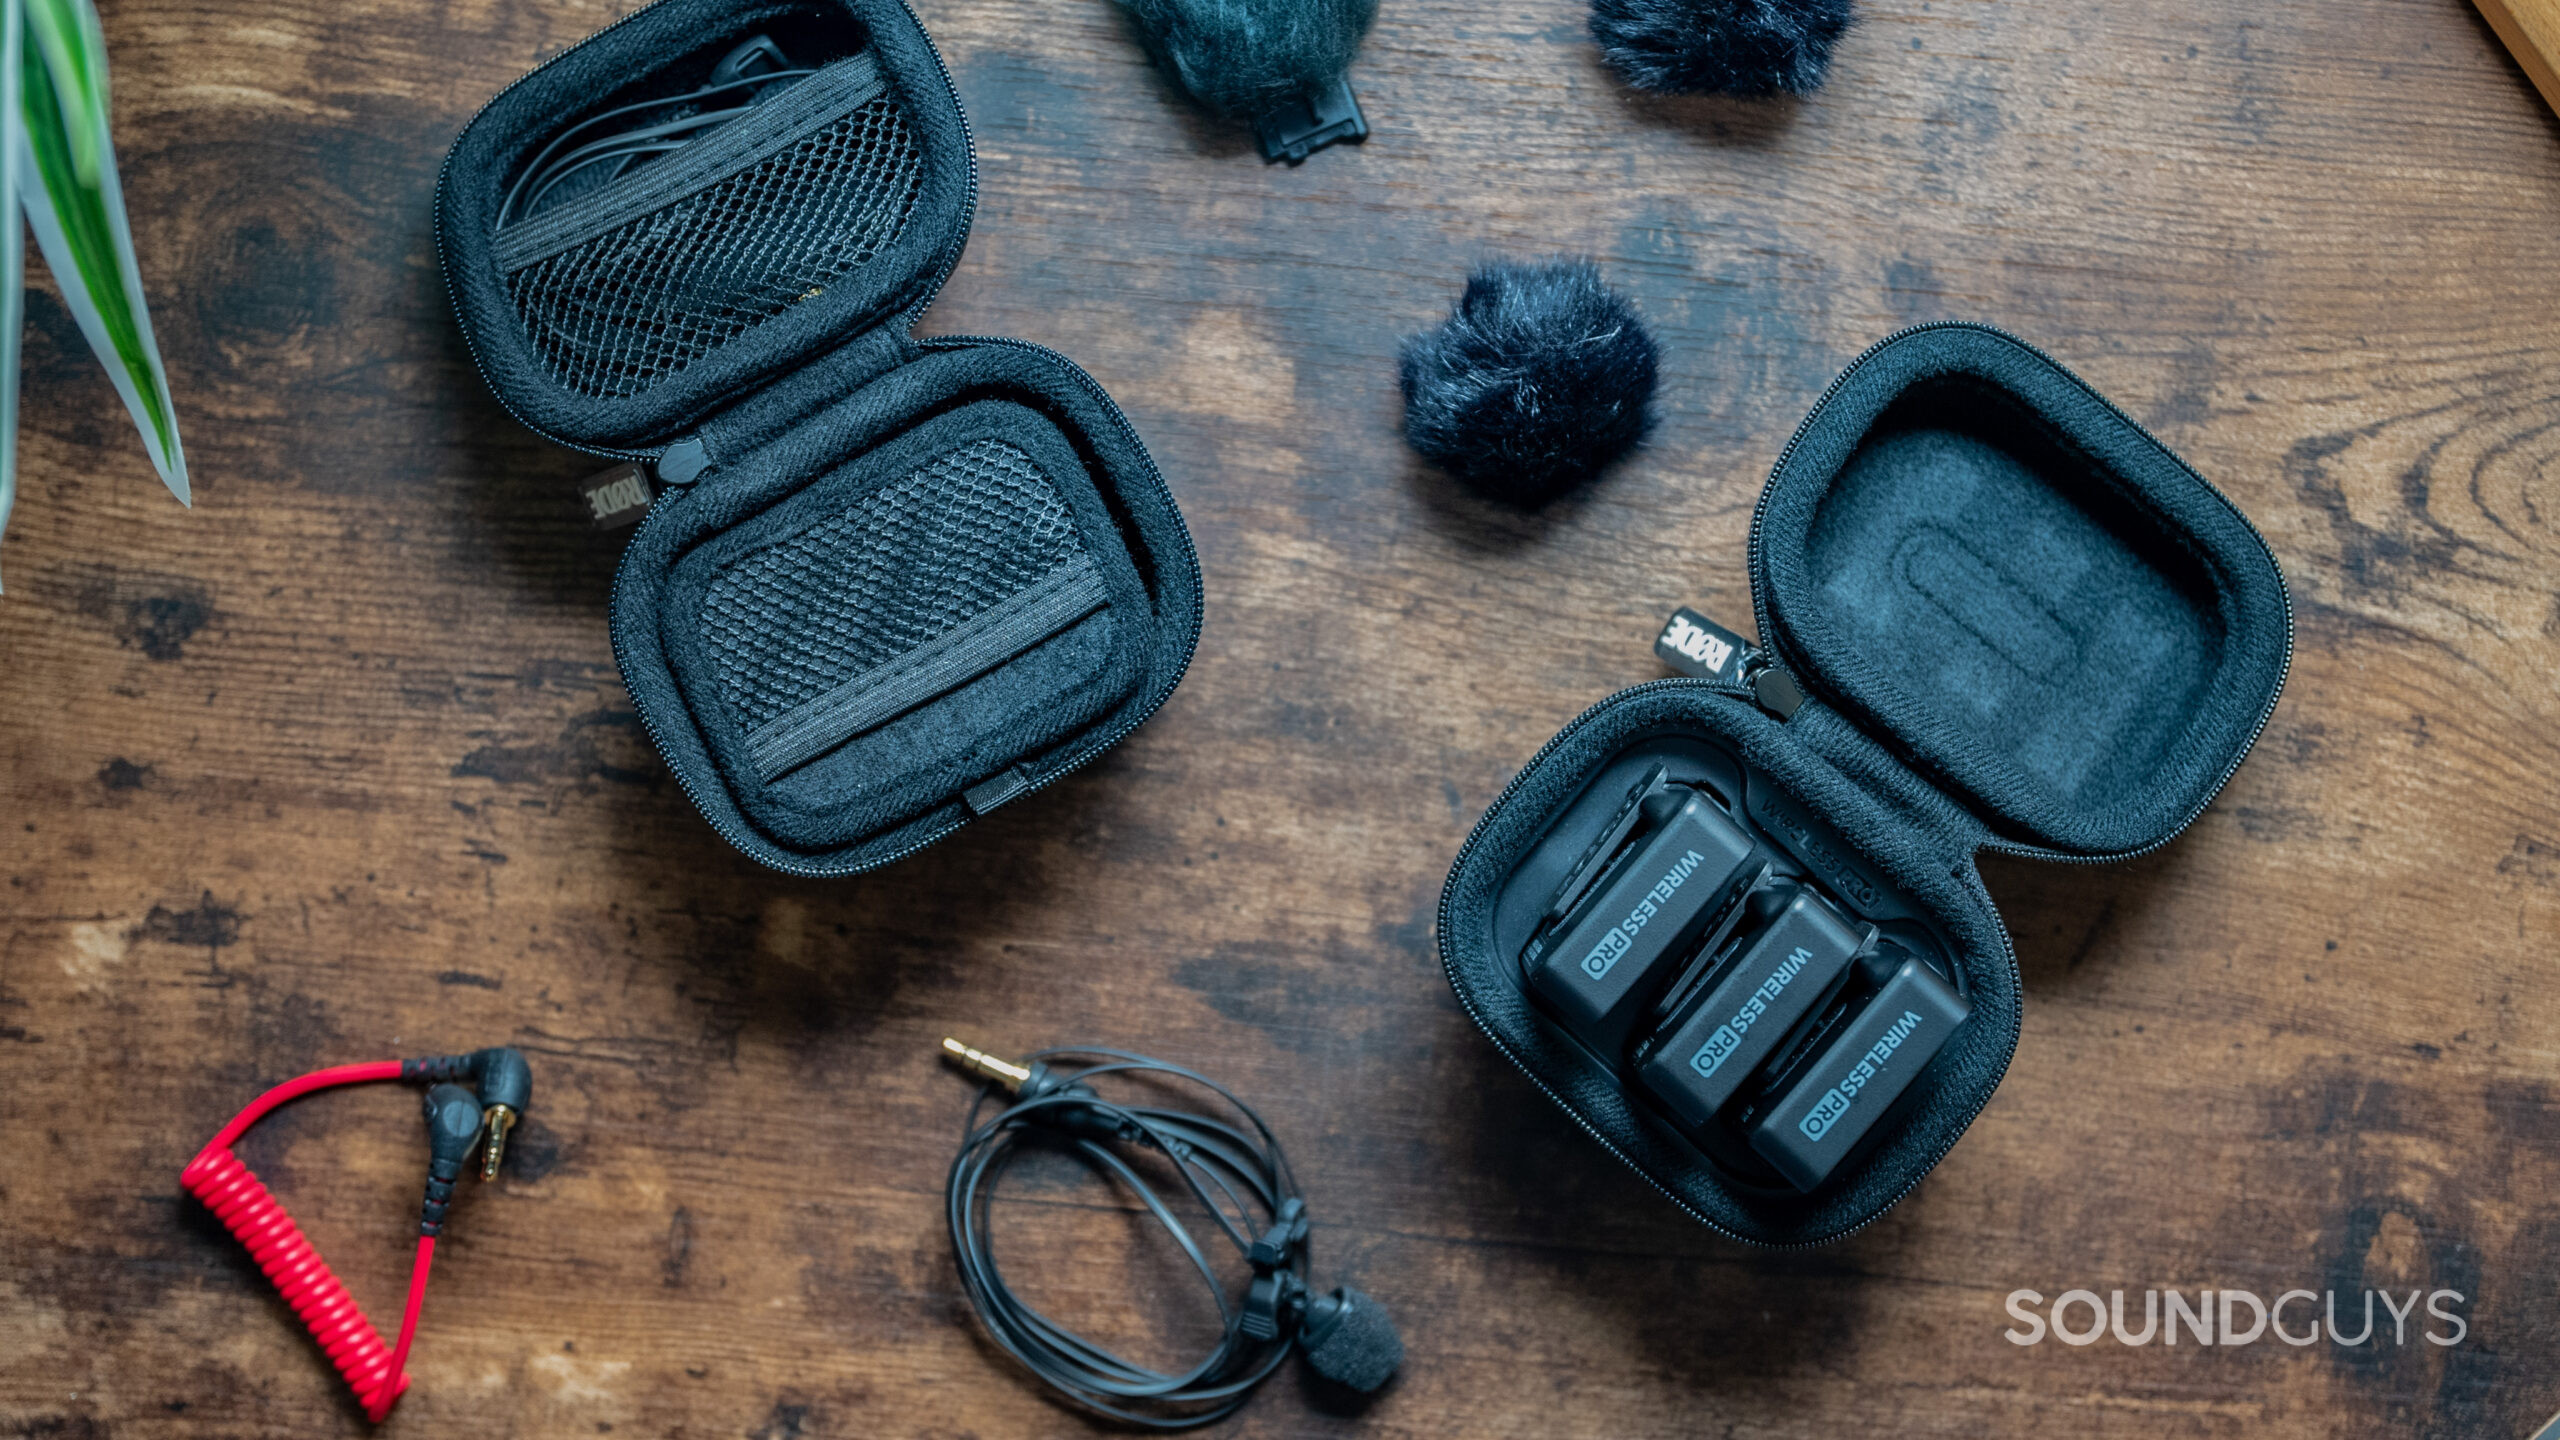 Overhead view of the Rode Wireless PRO and it's accessories.